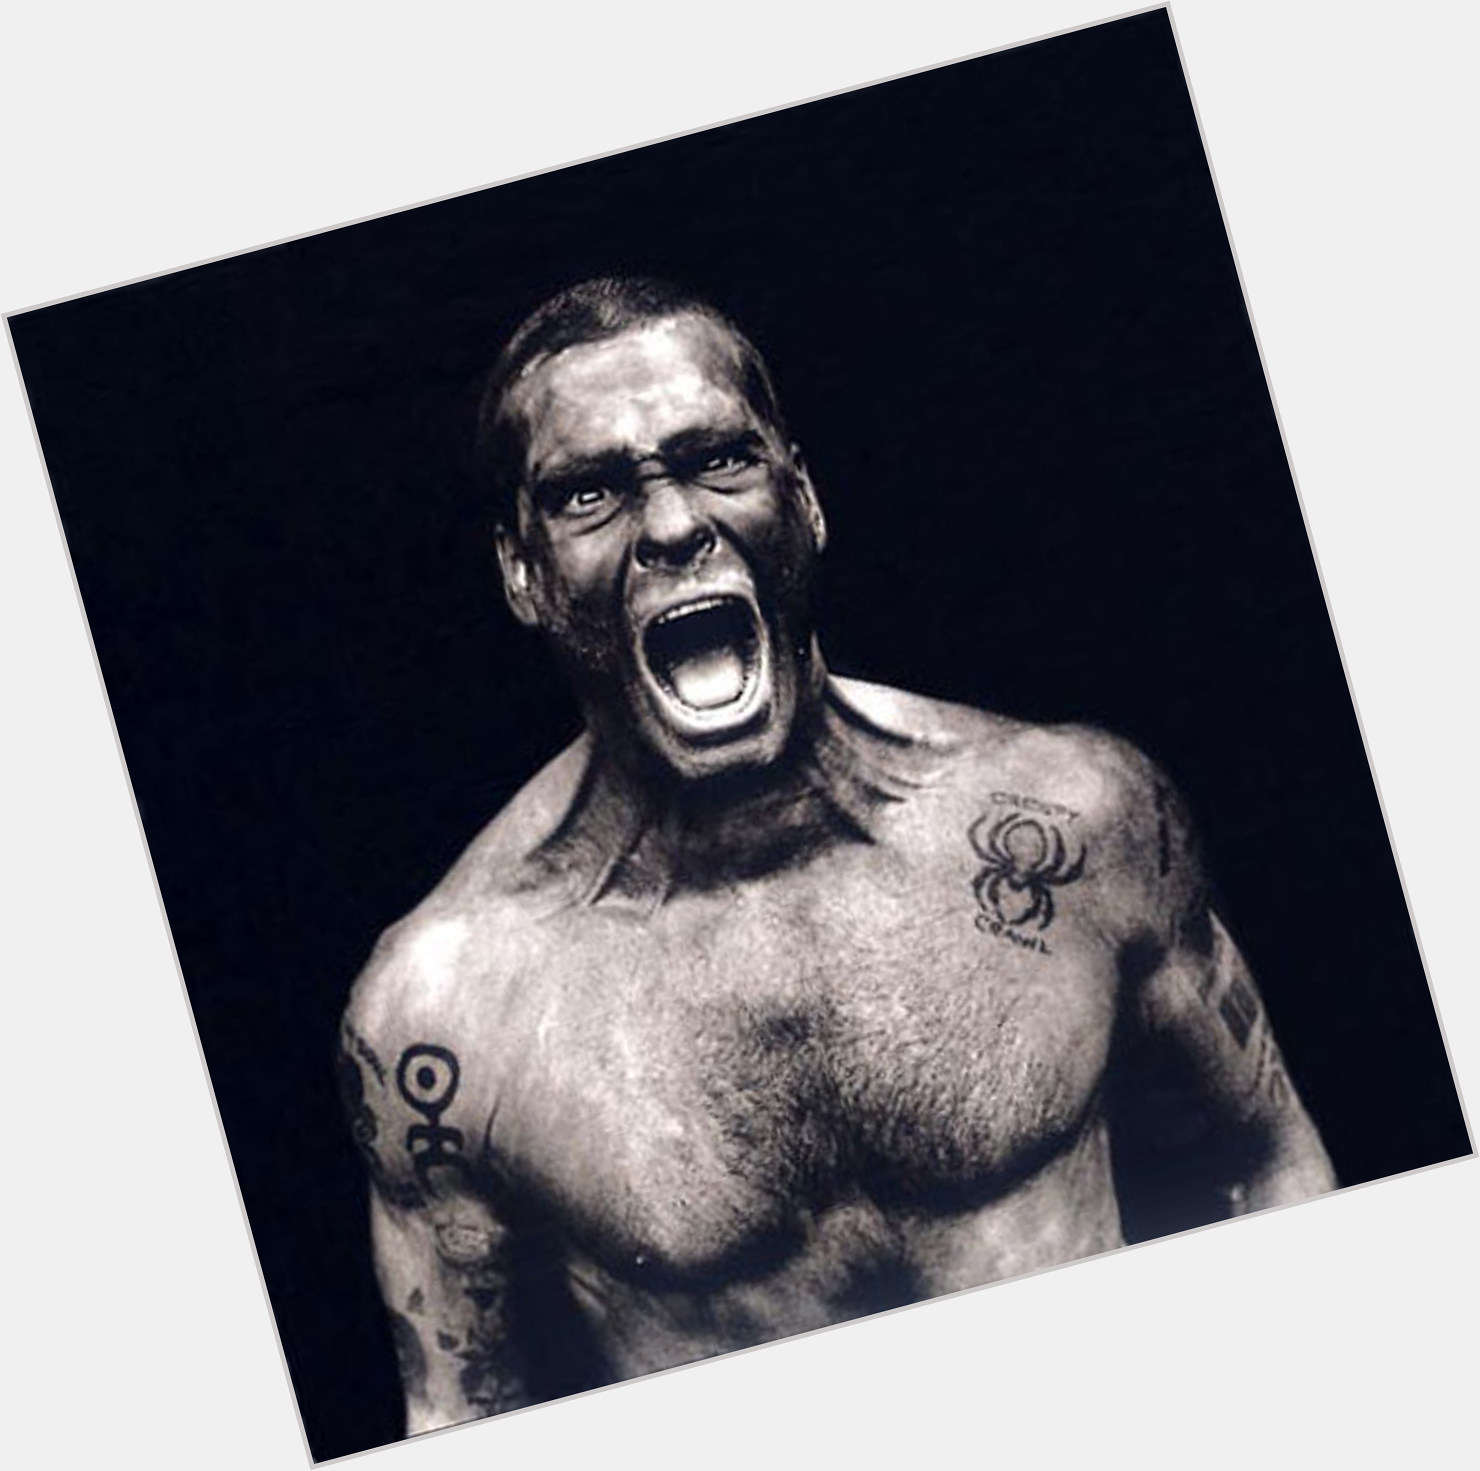 Happy 60th birthday to the inimitable, unstoppable, one and only Henry Rollins. 